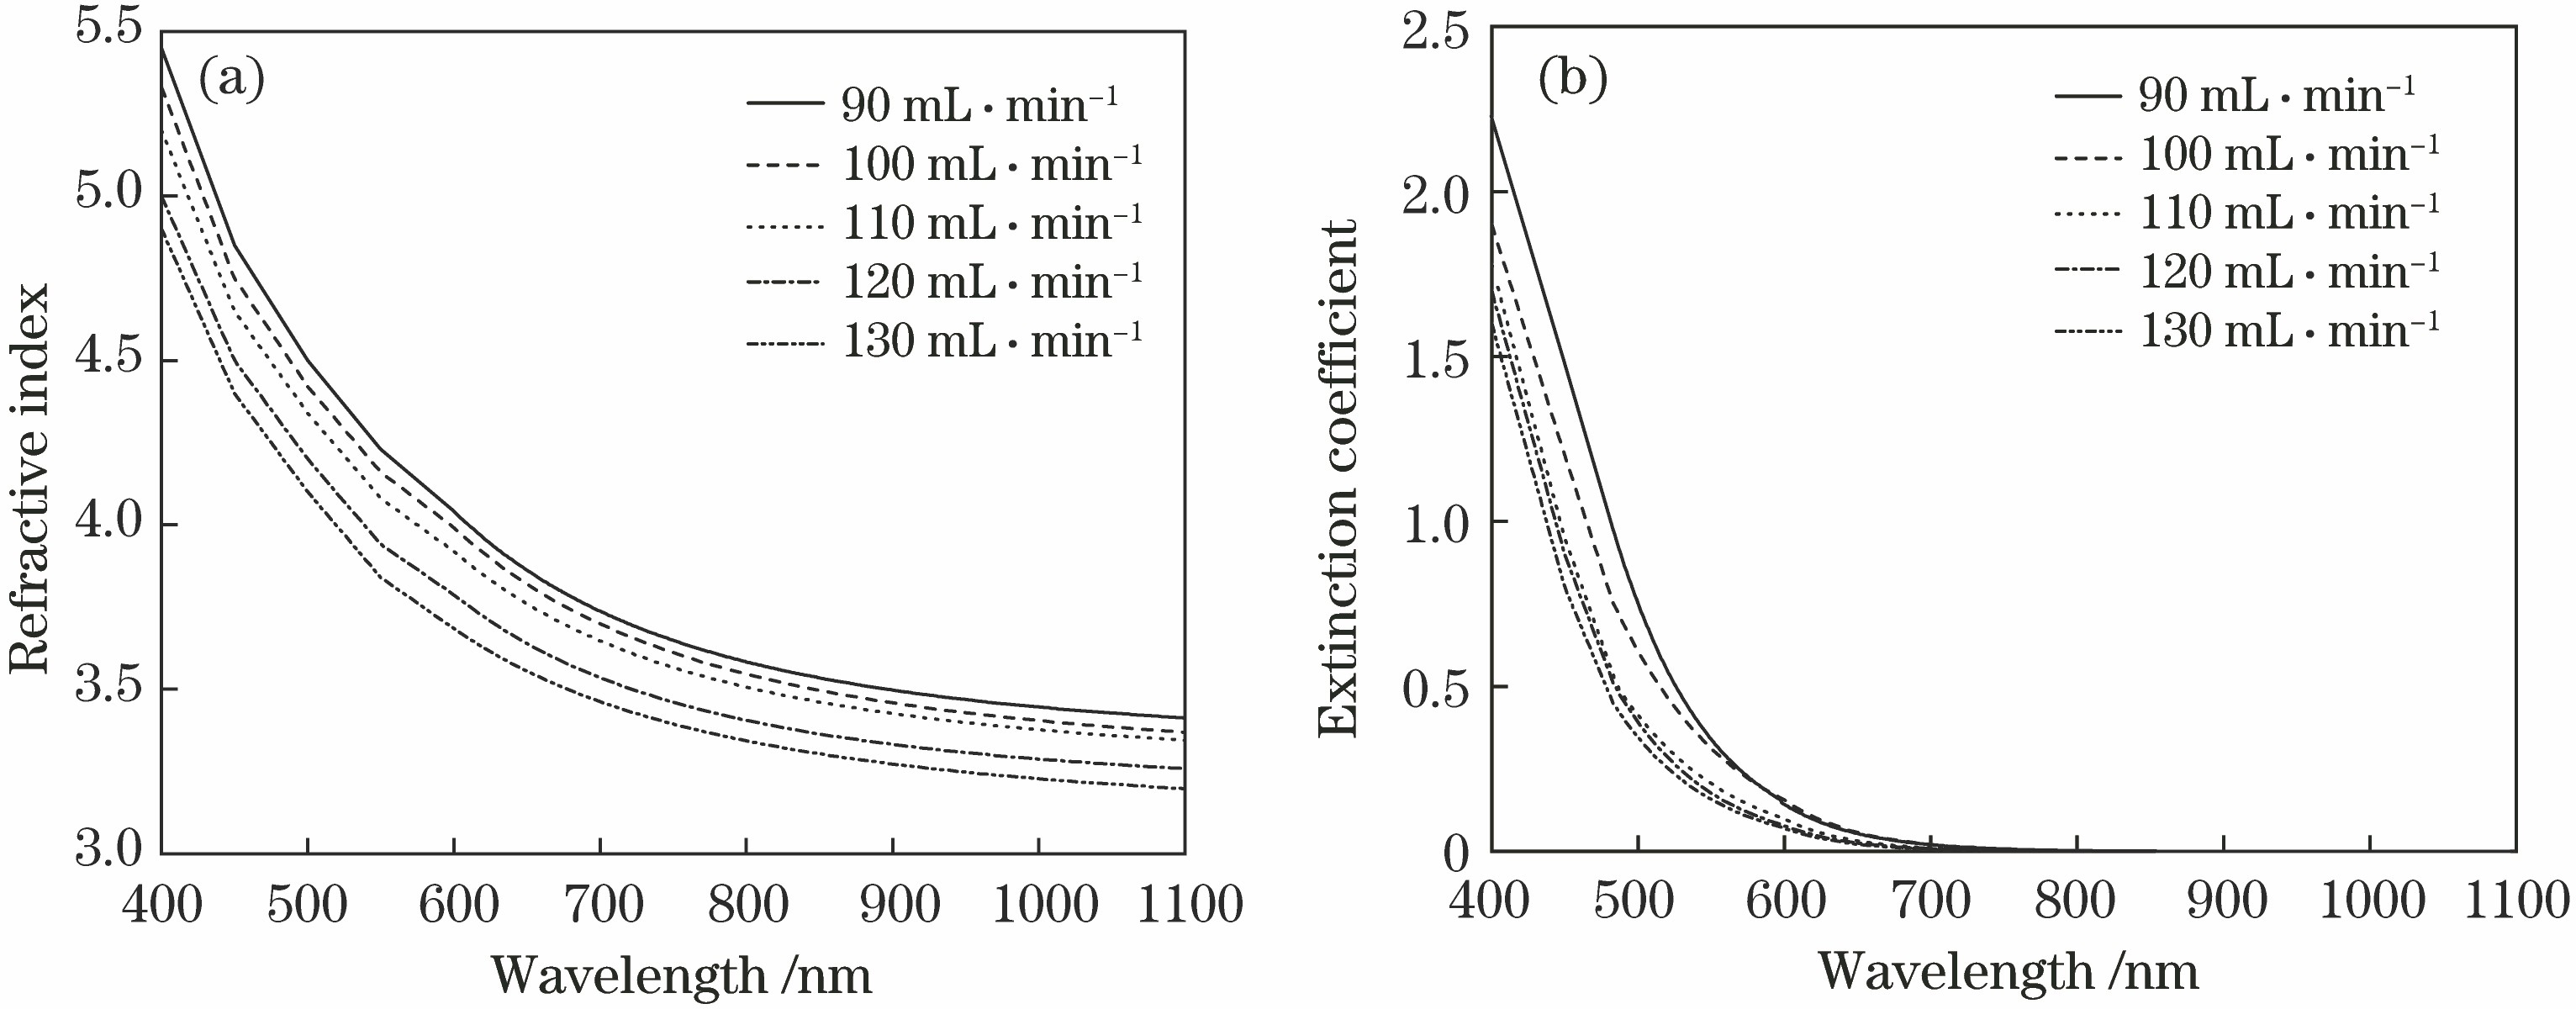 Optical constants of Si-H materials under different H2 gas flows. (a) Refractive index; (b) extinction coefficient